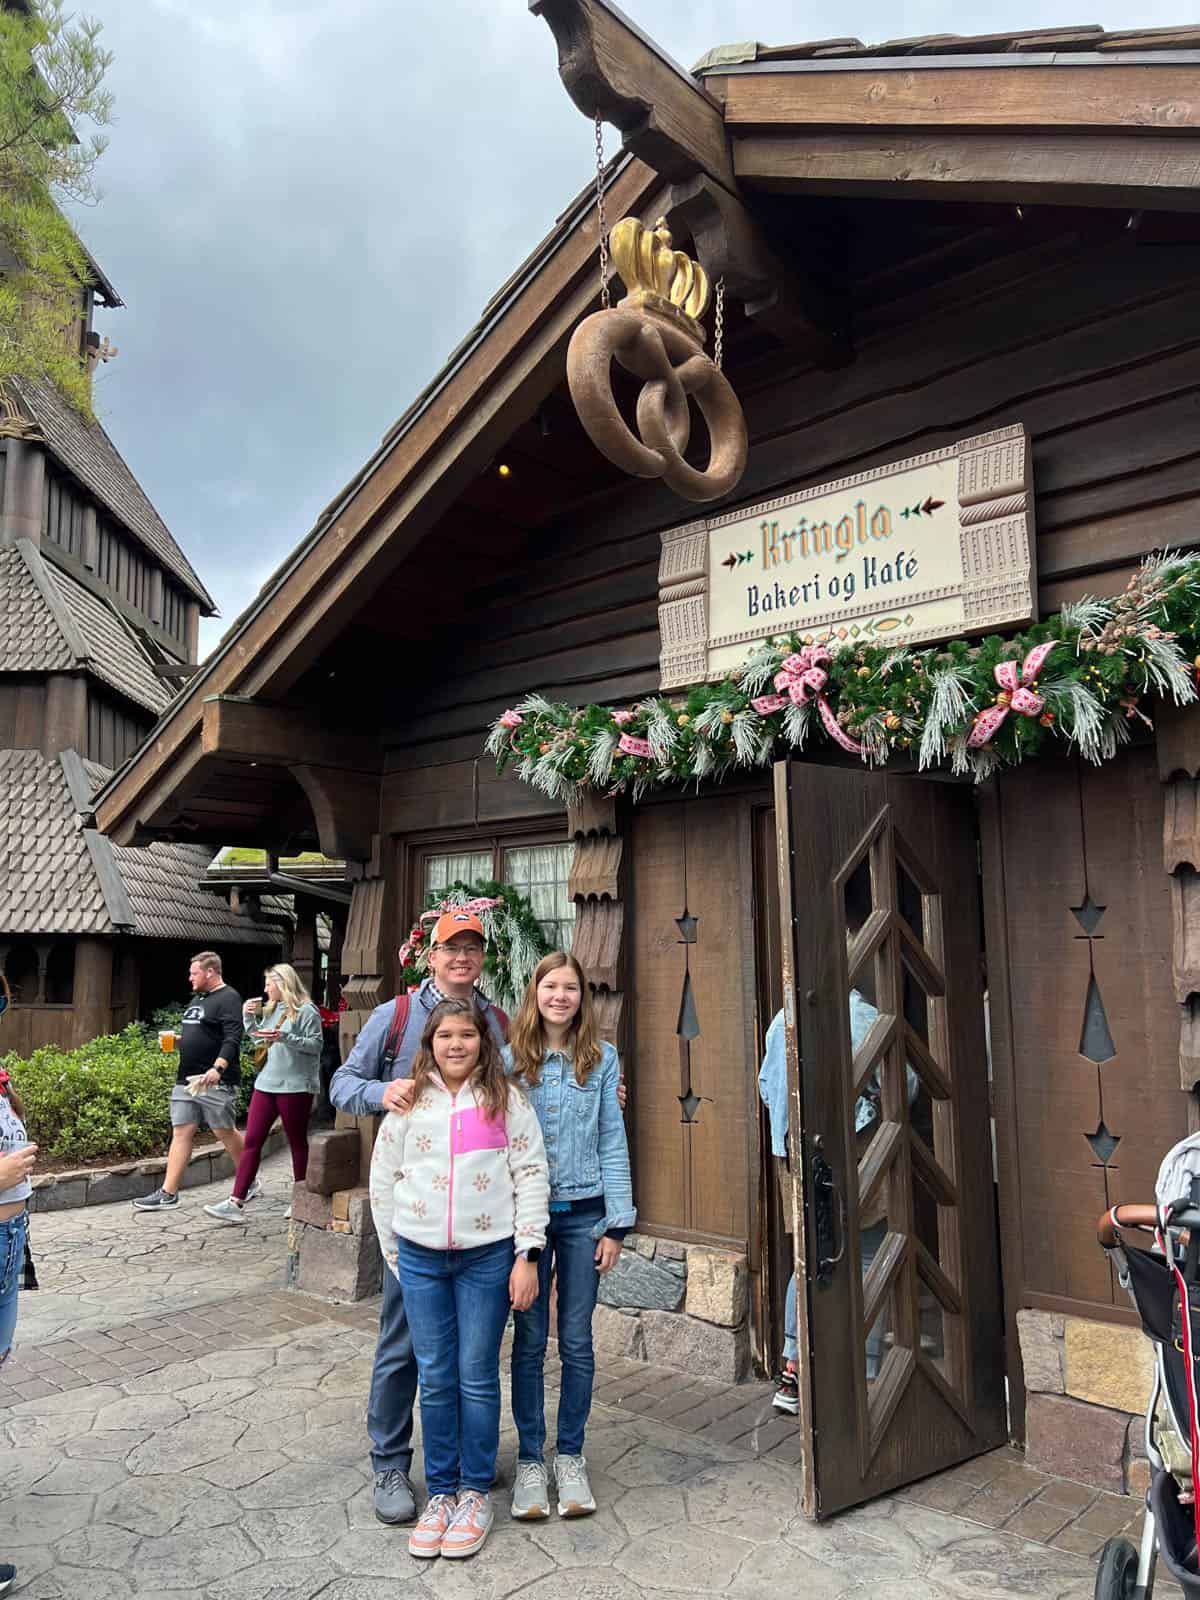 A family in front of the bakery in the Norway region at Epcot.